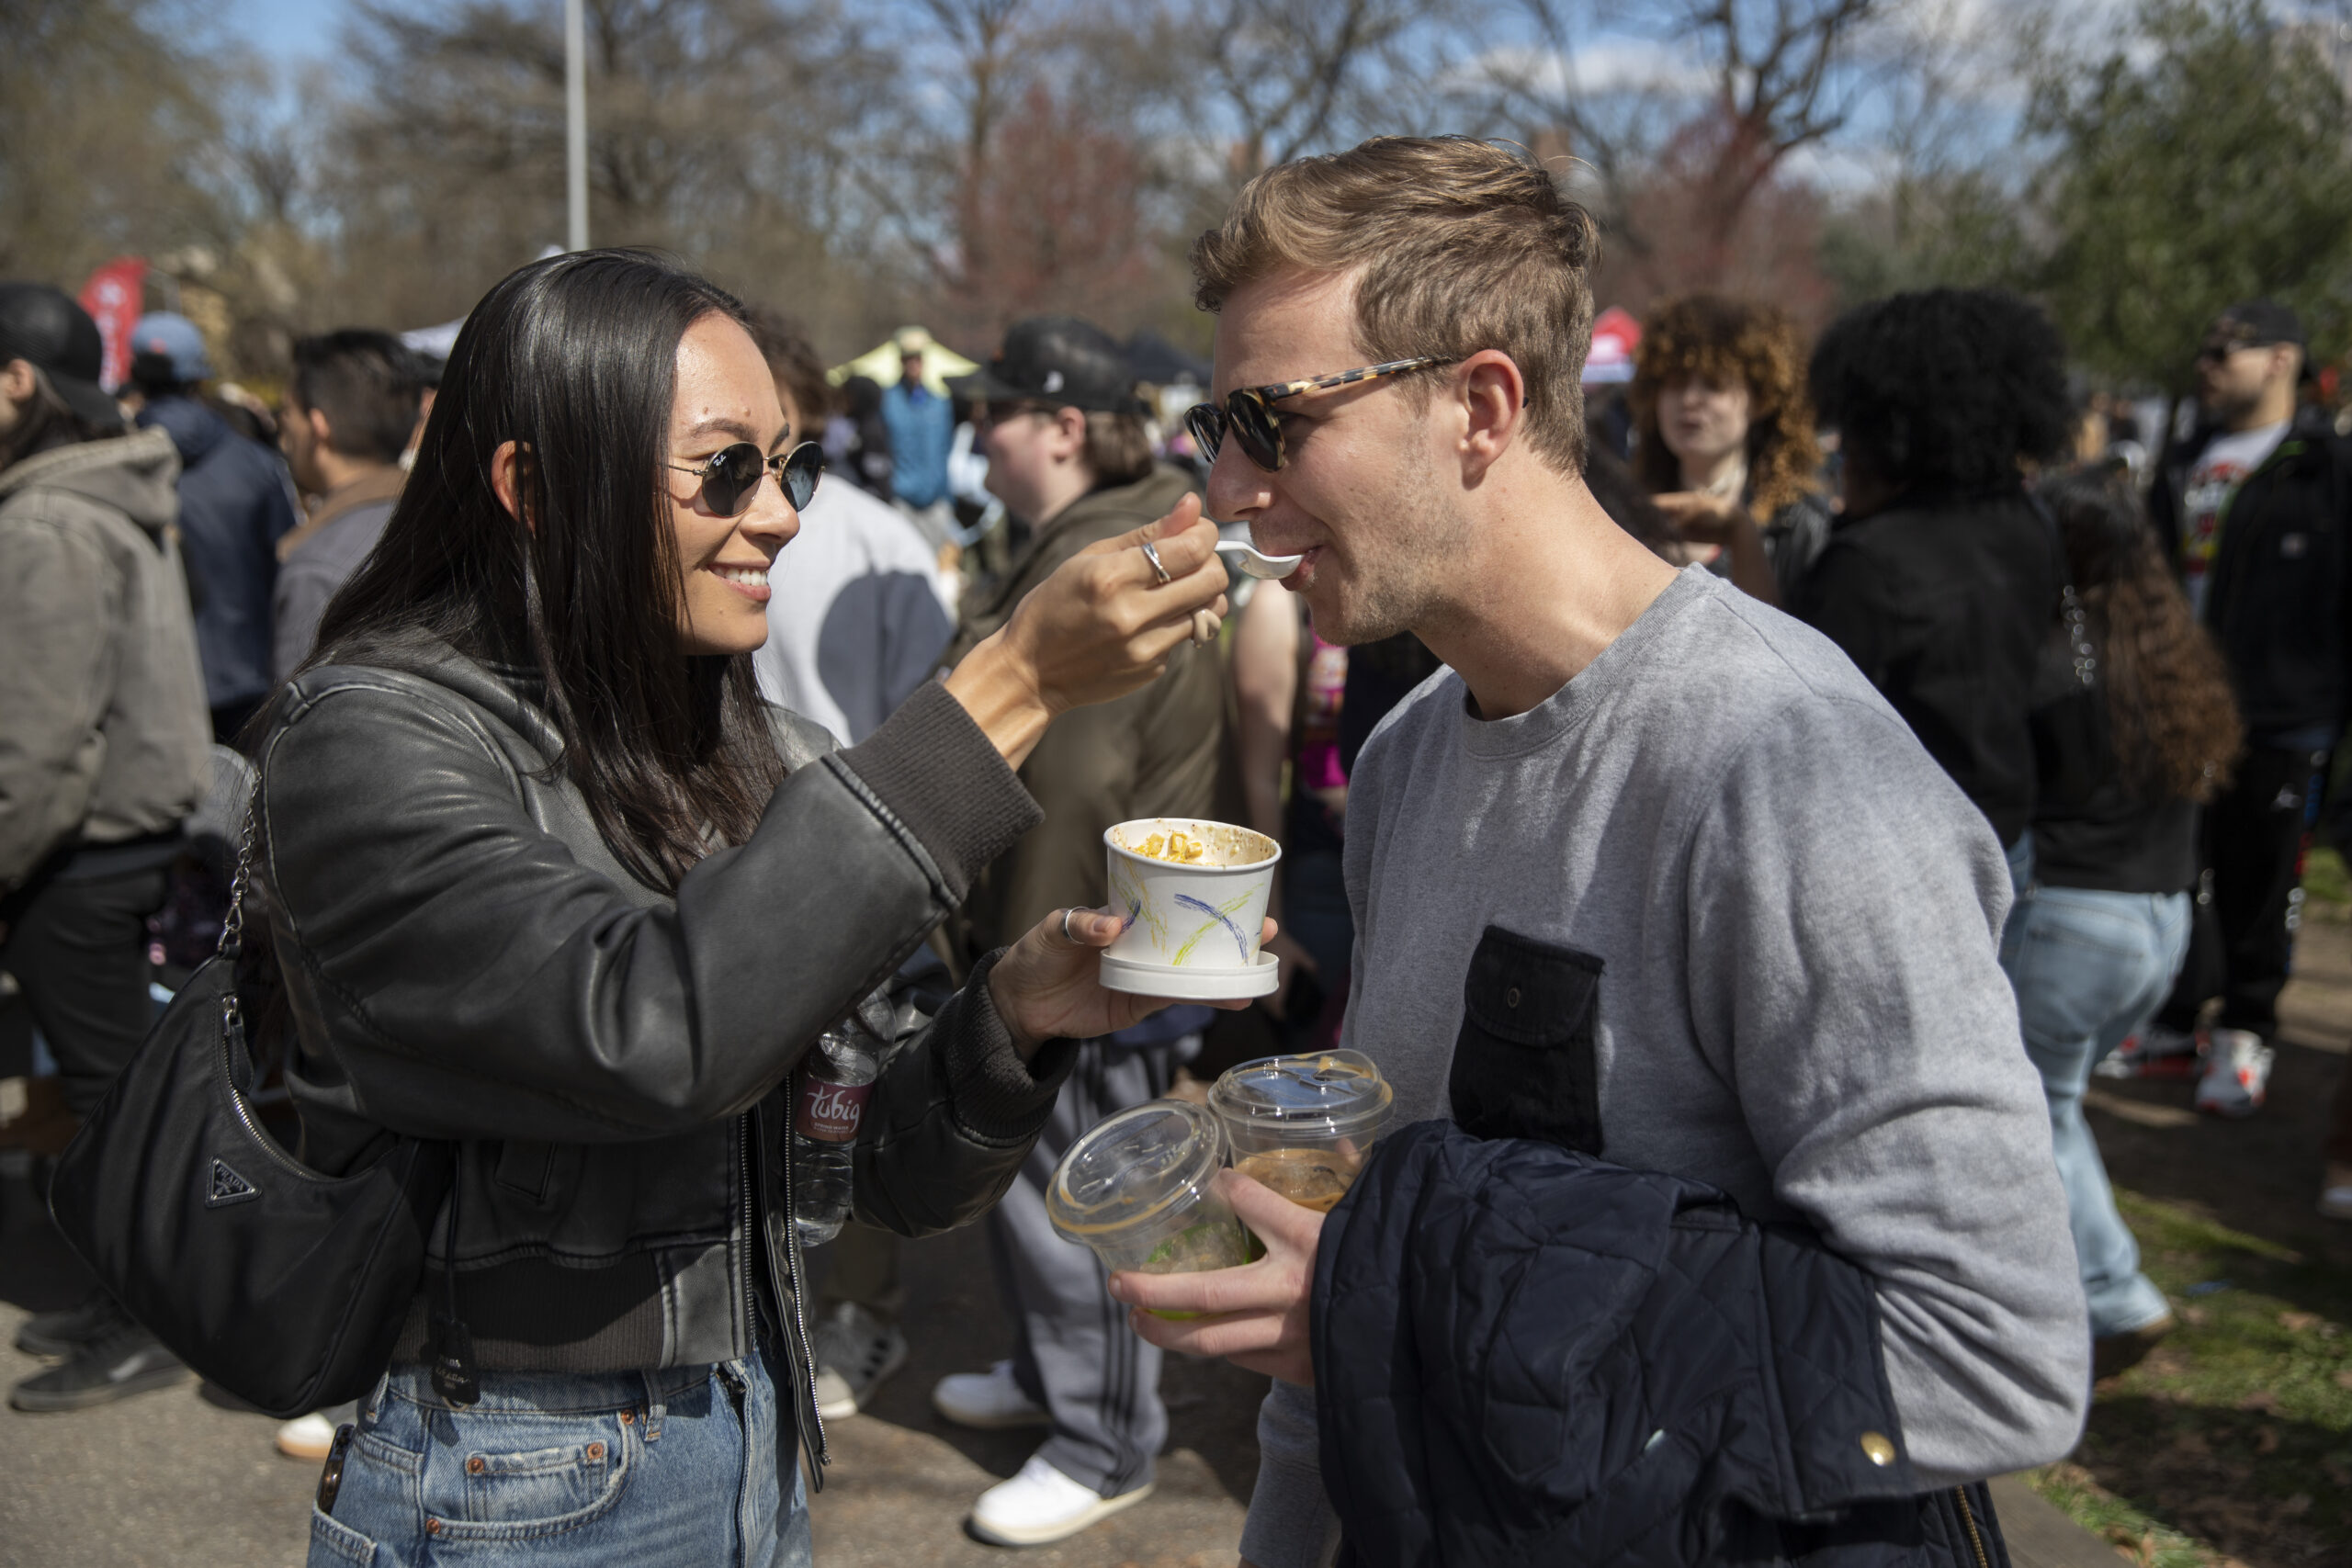 Lianne Yaacoby feeds Alec Schonfeld at Prospect Park Smorgasburg.